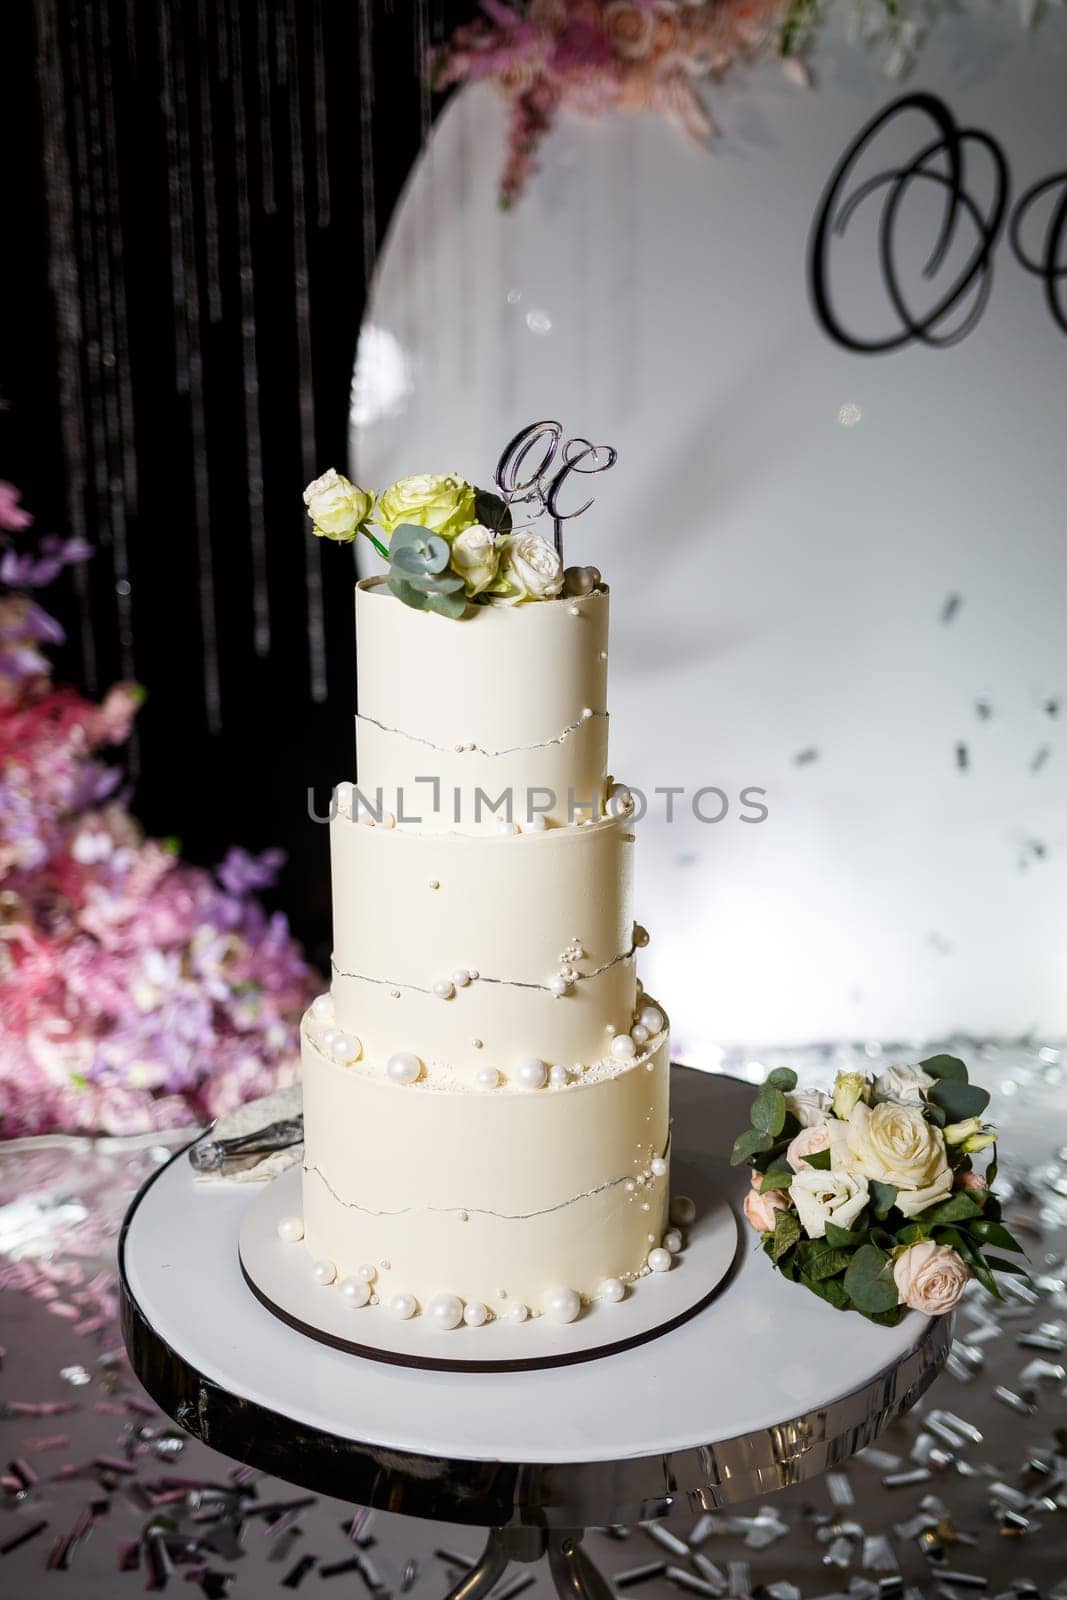 Delicious sweet layered fresh cake for the holiday with beautiful decorations by Dmitrytph